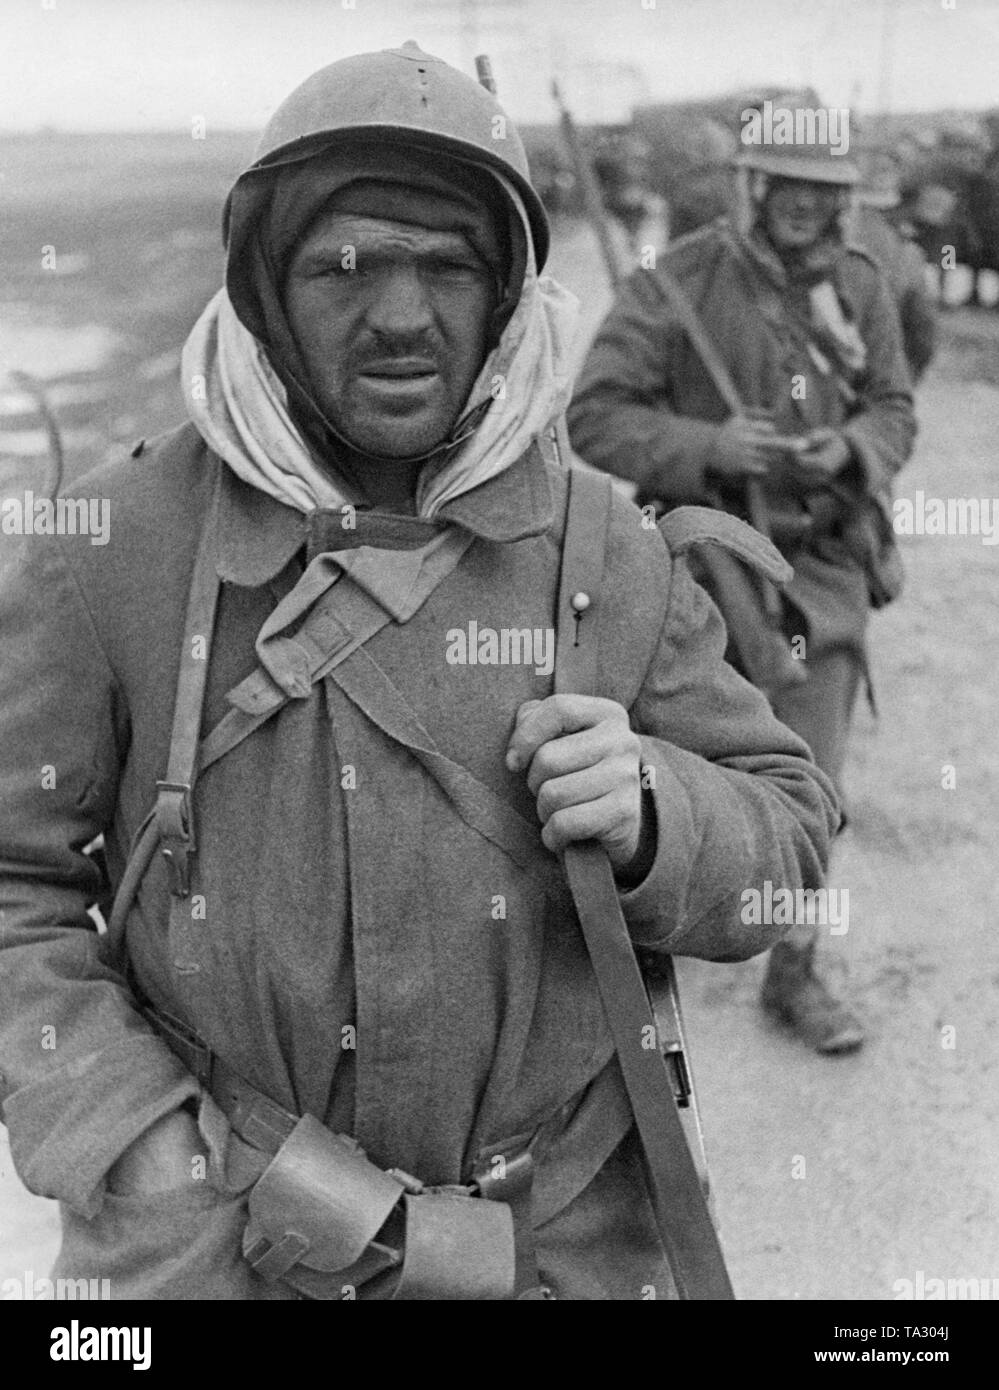 Photo of two completely exhausted Italian soldiers of the Corpo Truppe Volontarie at the front during the Battle of Guadalajara in March, 1937.  The soldiers wear caps and scarves under their uniform against the cold. Stock Photo